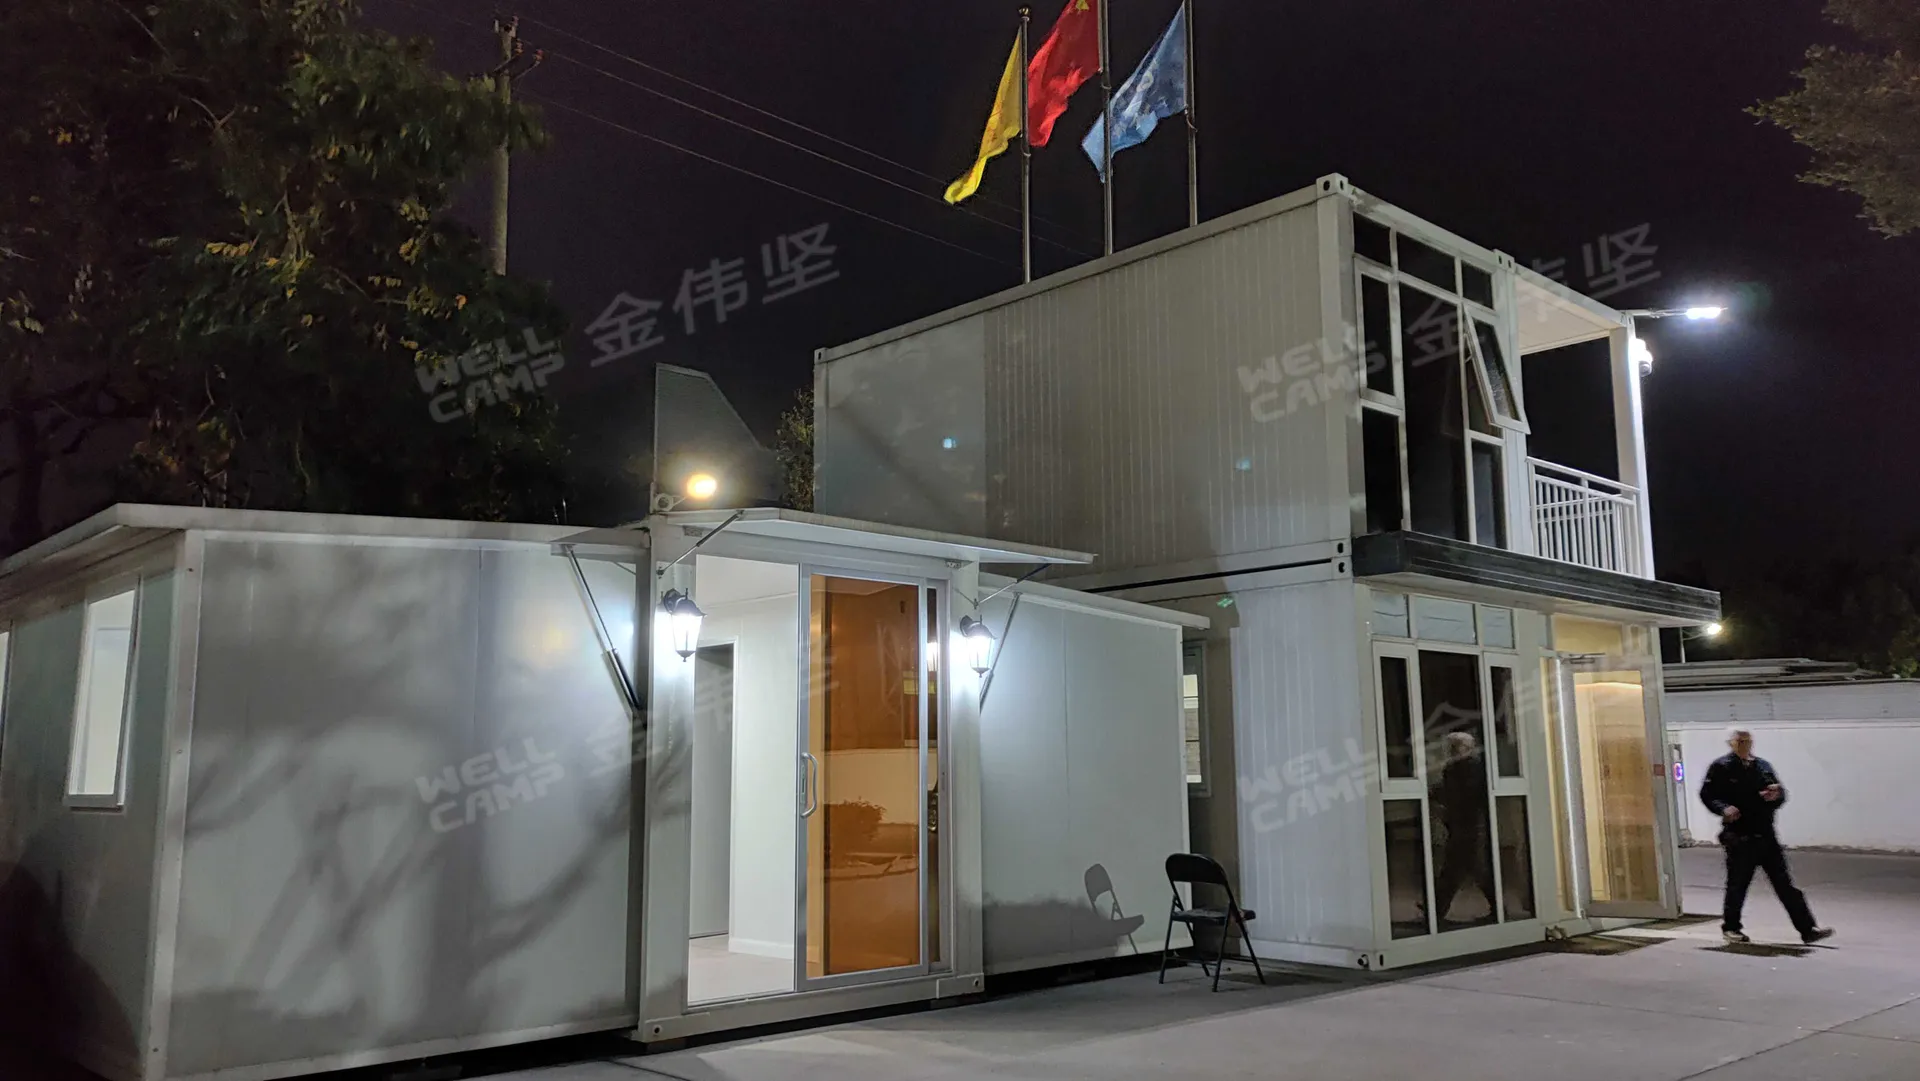 This expandable container house project is in Japan